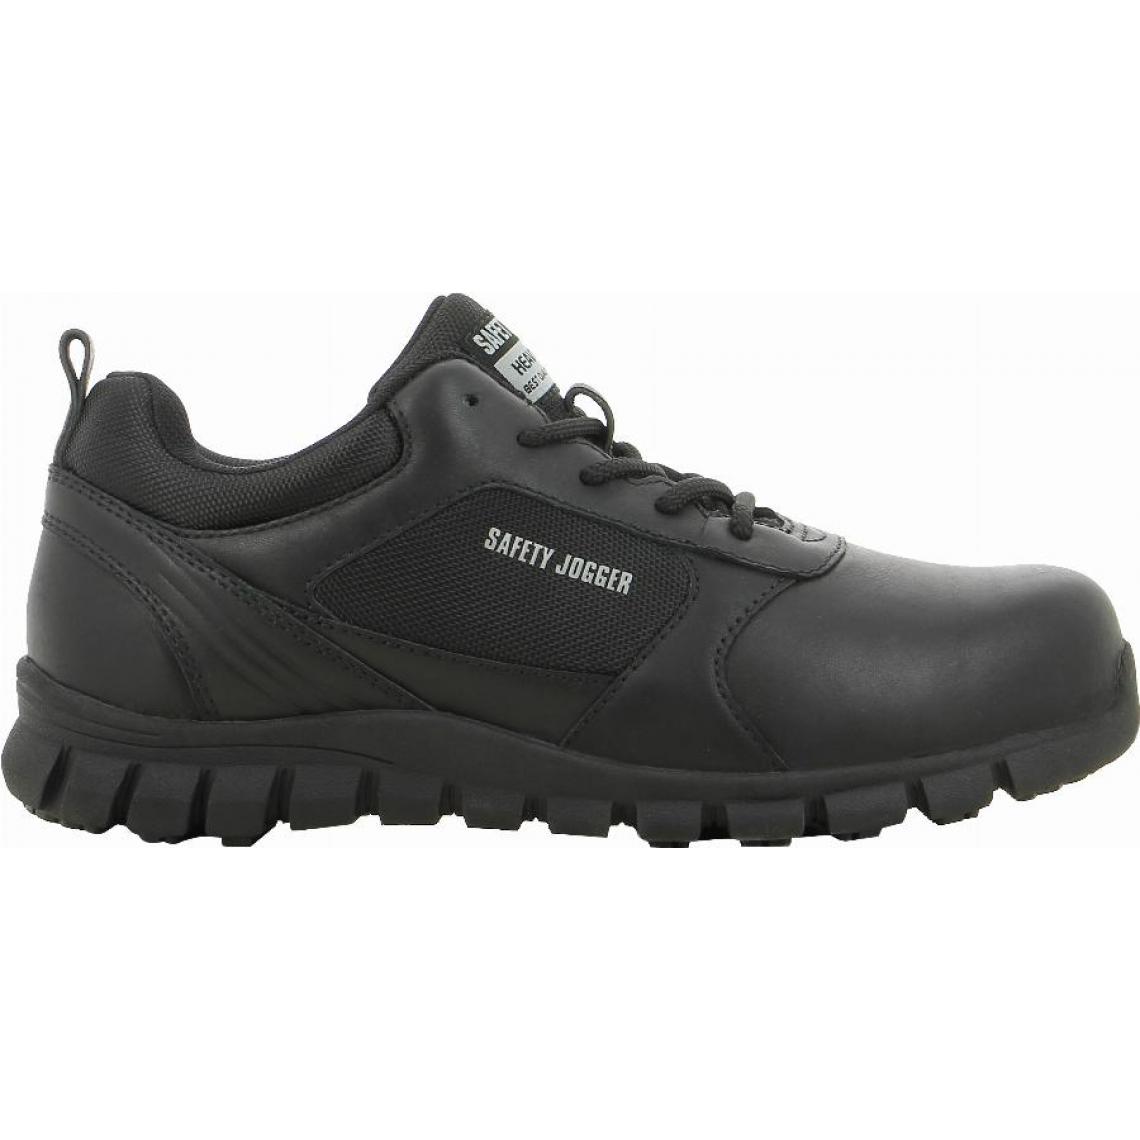 Safety Jogger - Chaussure basse ultra-légère S3 Komodo T45 SAFETY JOGGER - 200984 45 - Equipement de Protection Individuelle